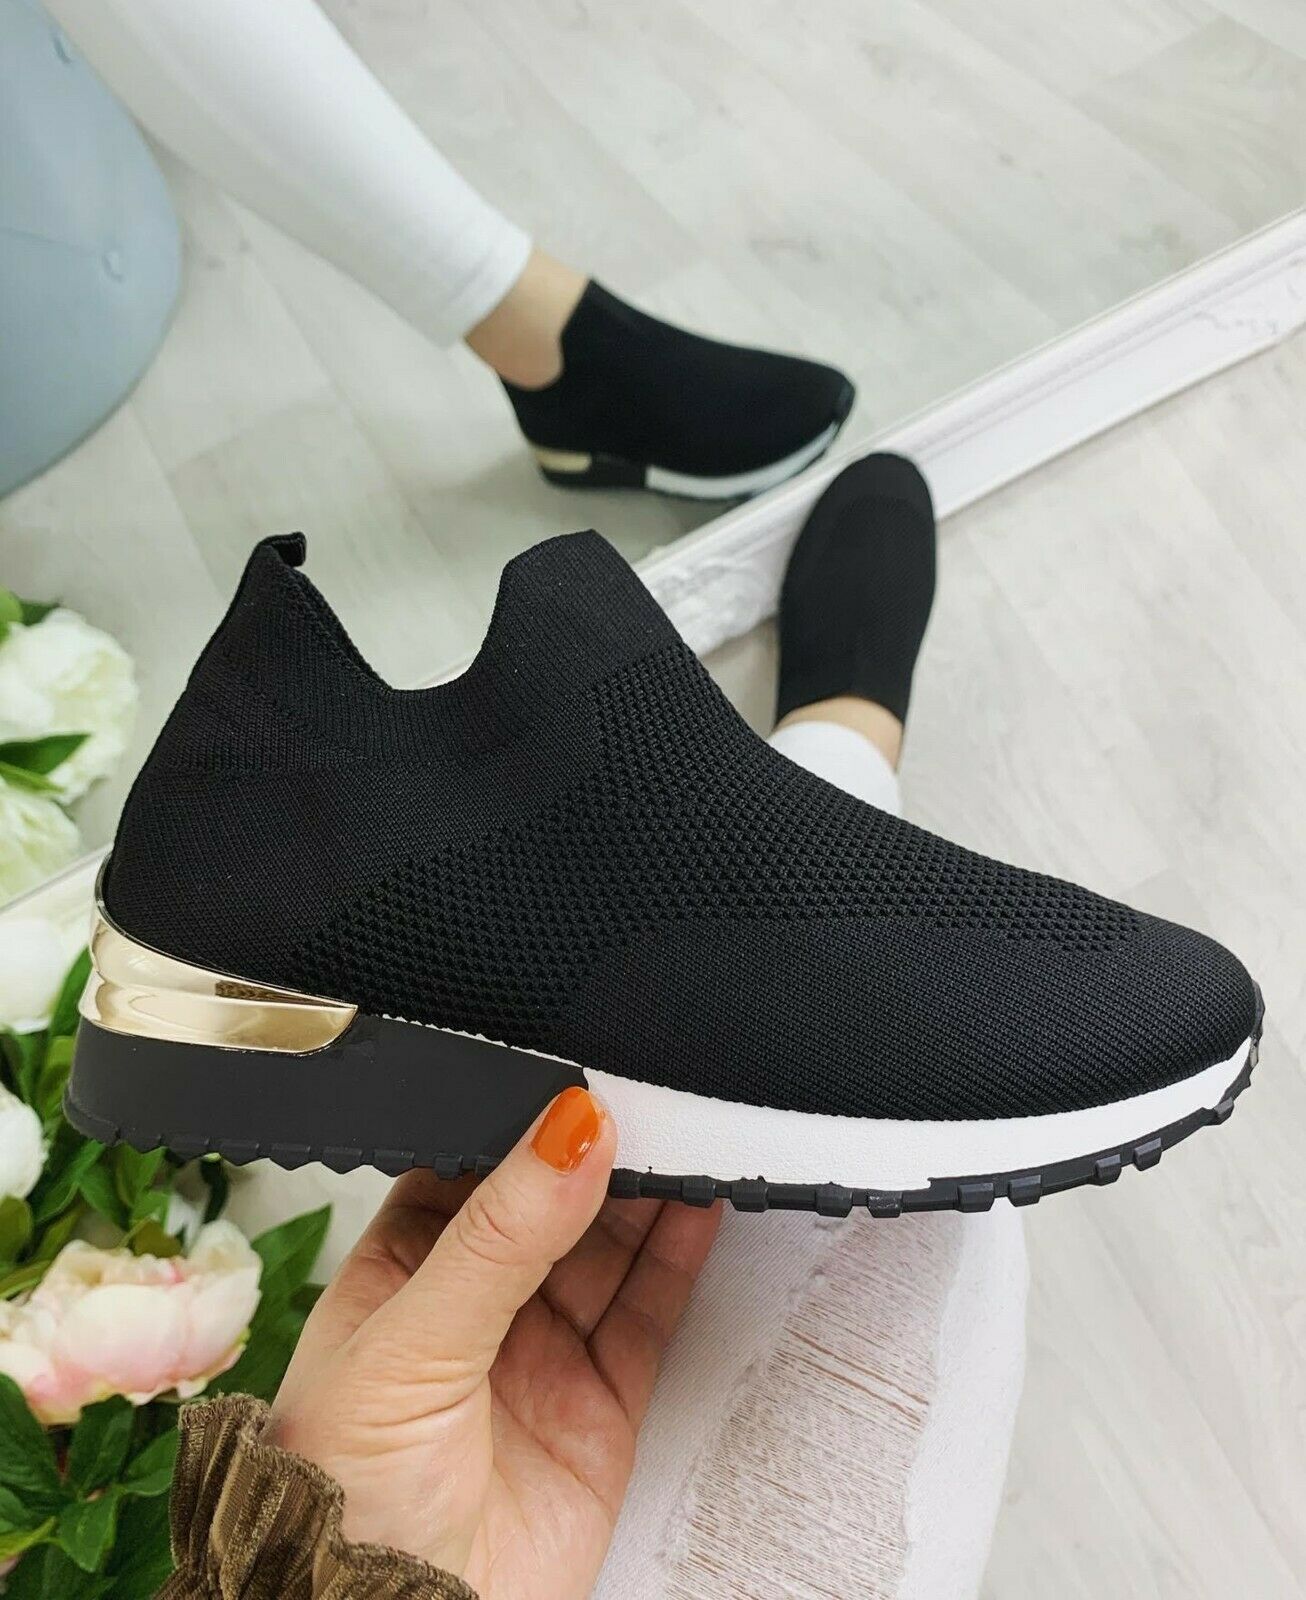 UK Size 6 EUR Size 39 Black Ladies Womens Slip on Sock Wedge Sneakers Classic Jogging Pumps Shoes Trainers